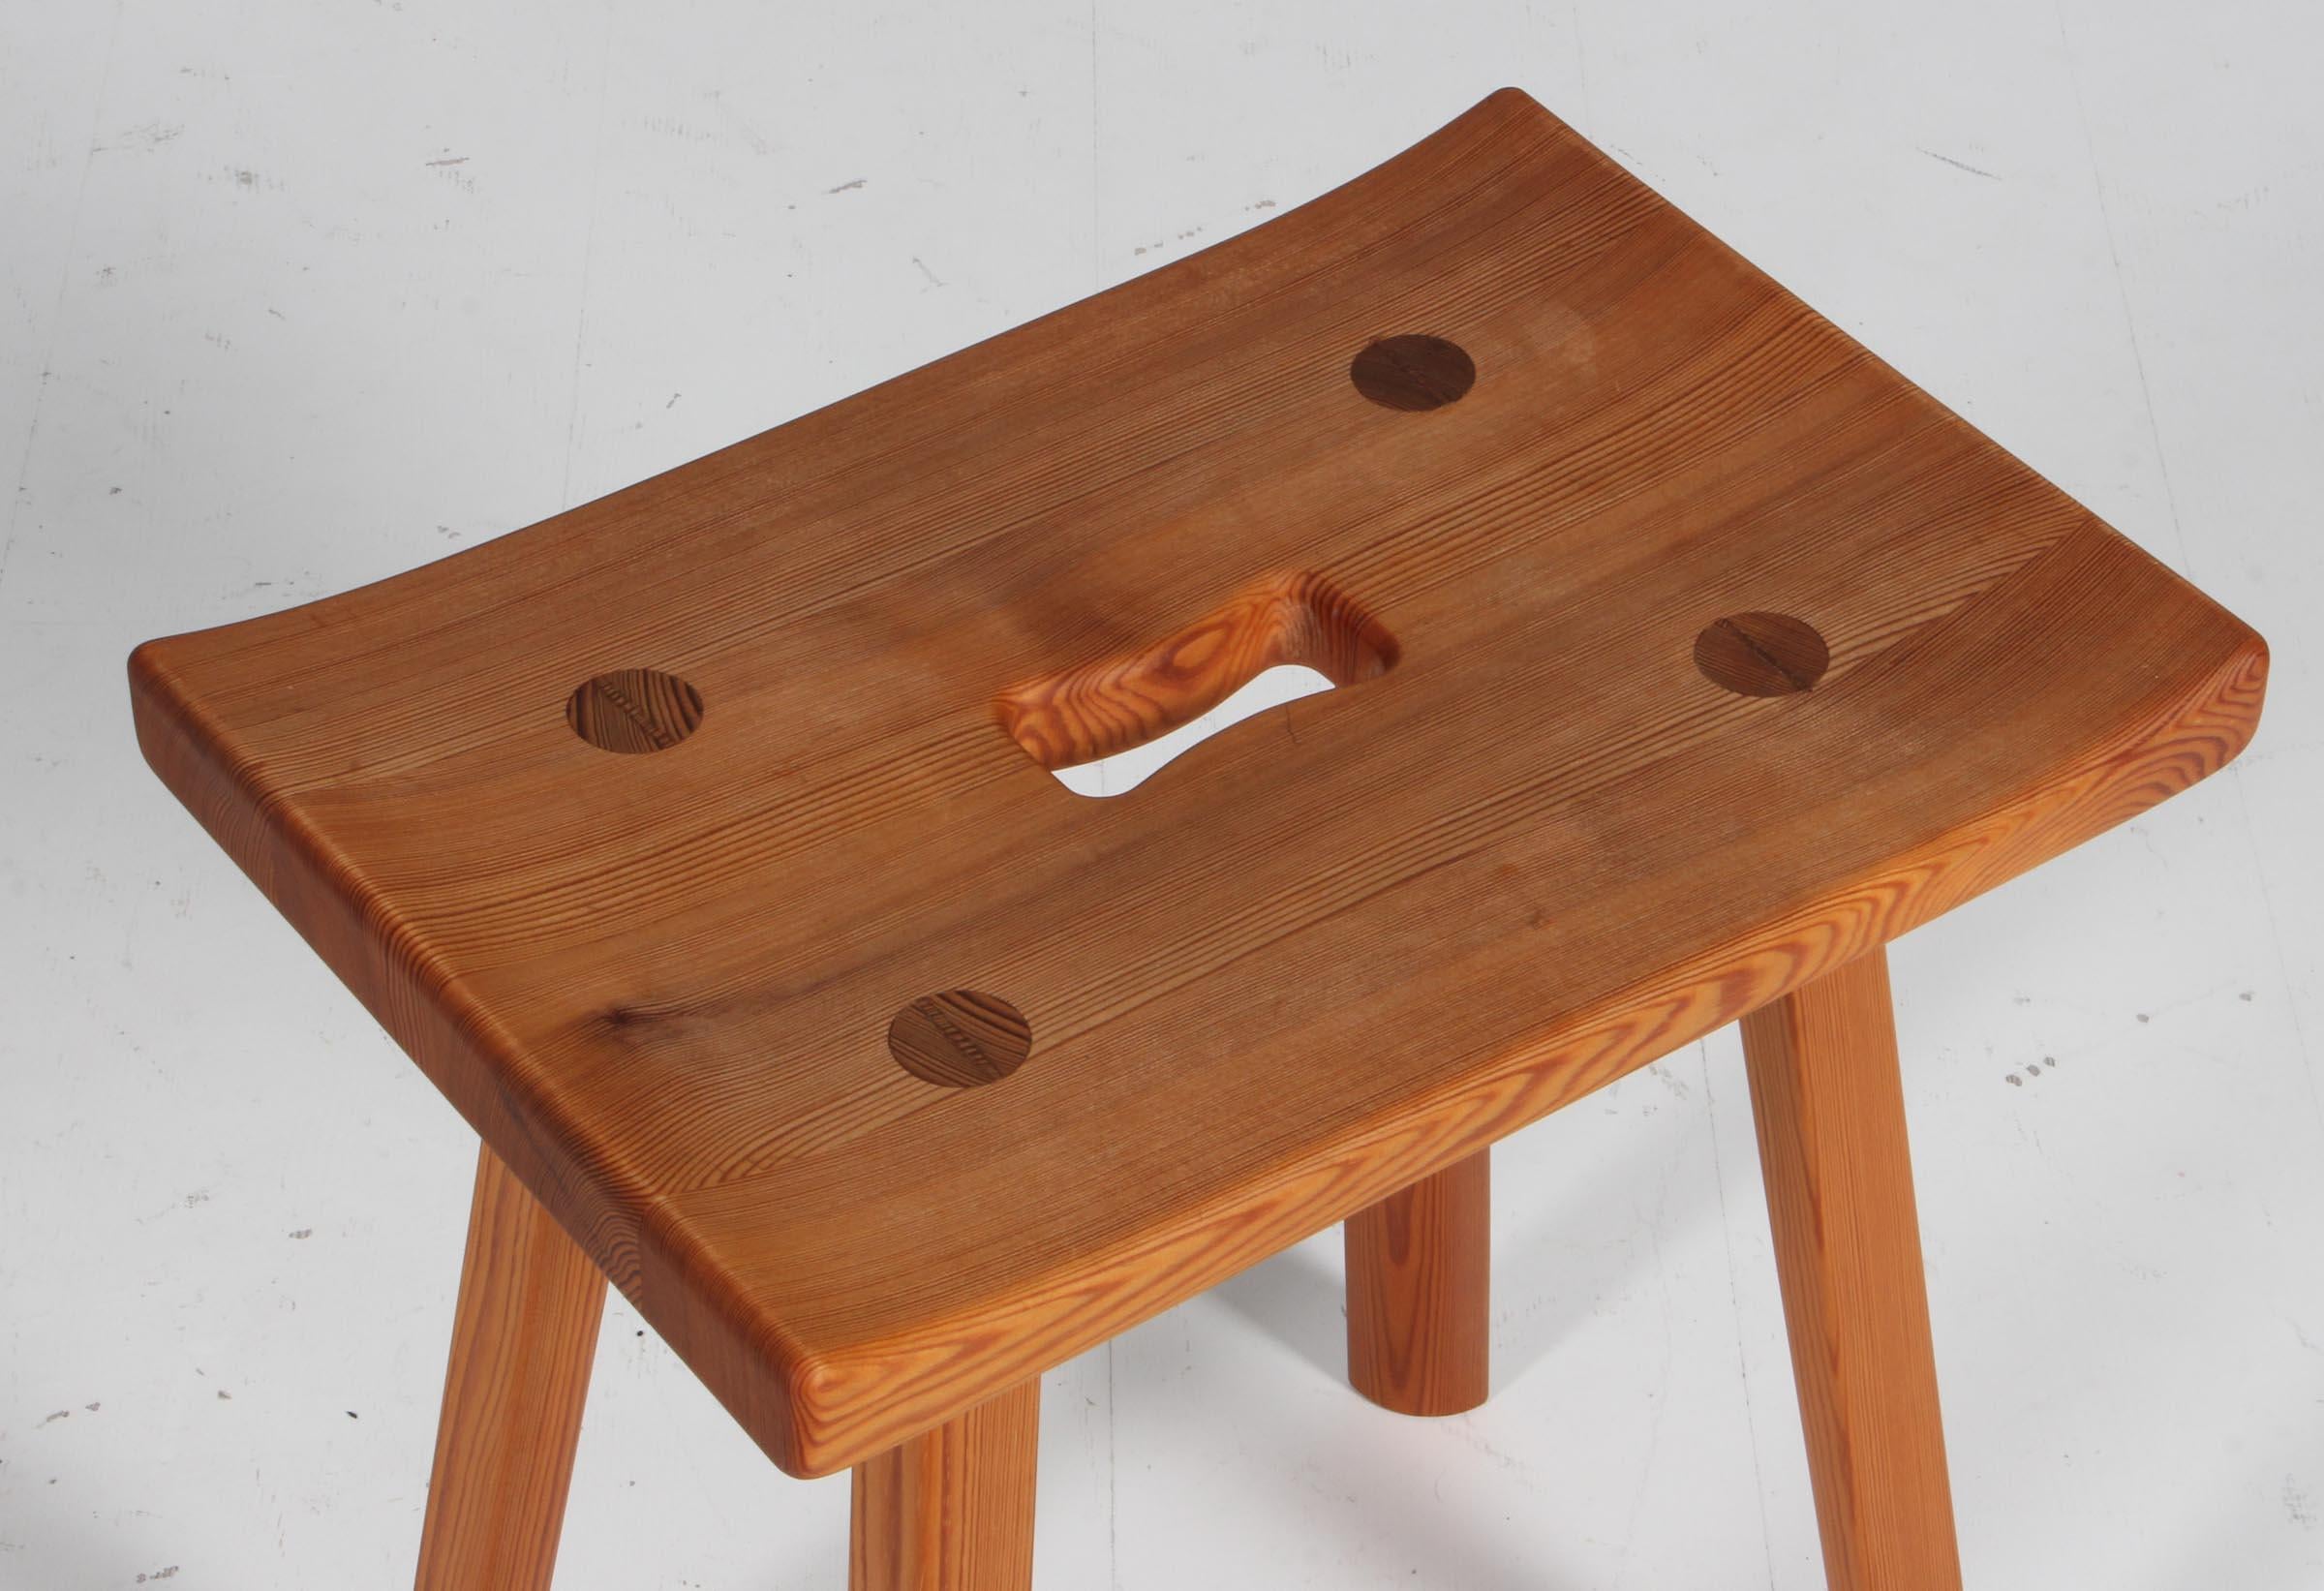 1960’s ‘Hadar’ solid pine wood stoolby Carl Malmsten. The design features simple and efficient lines combined with characteristic round edges. Original piece manufactured in Sweden in the 1960’s

Vintage condition

Carl Malmsten was a Swedish